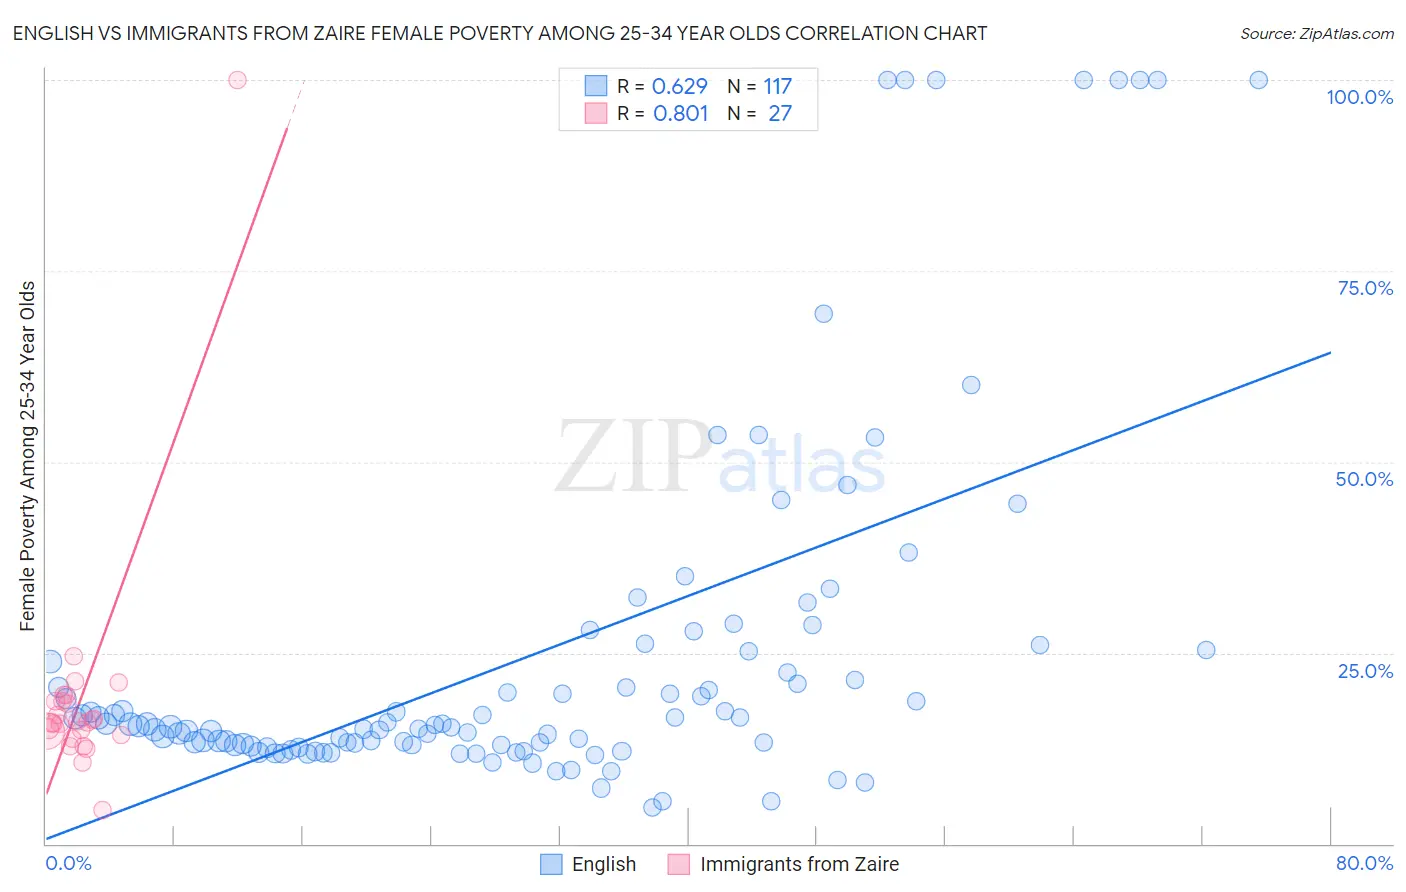 English vs Immigrants from Zaire Female Poverty Among 25-34 Year Olds